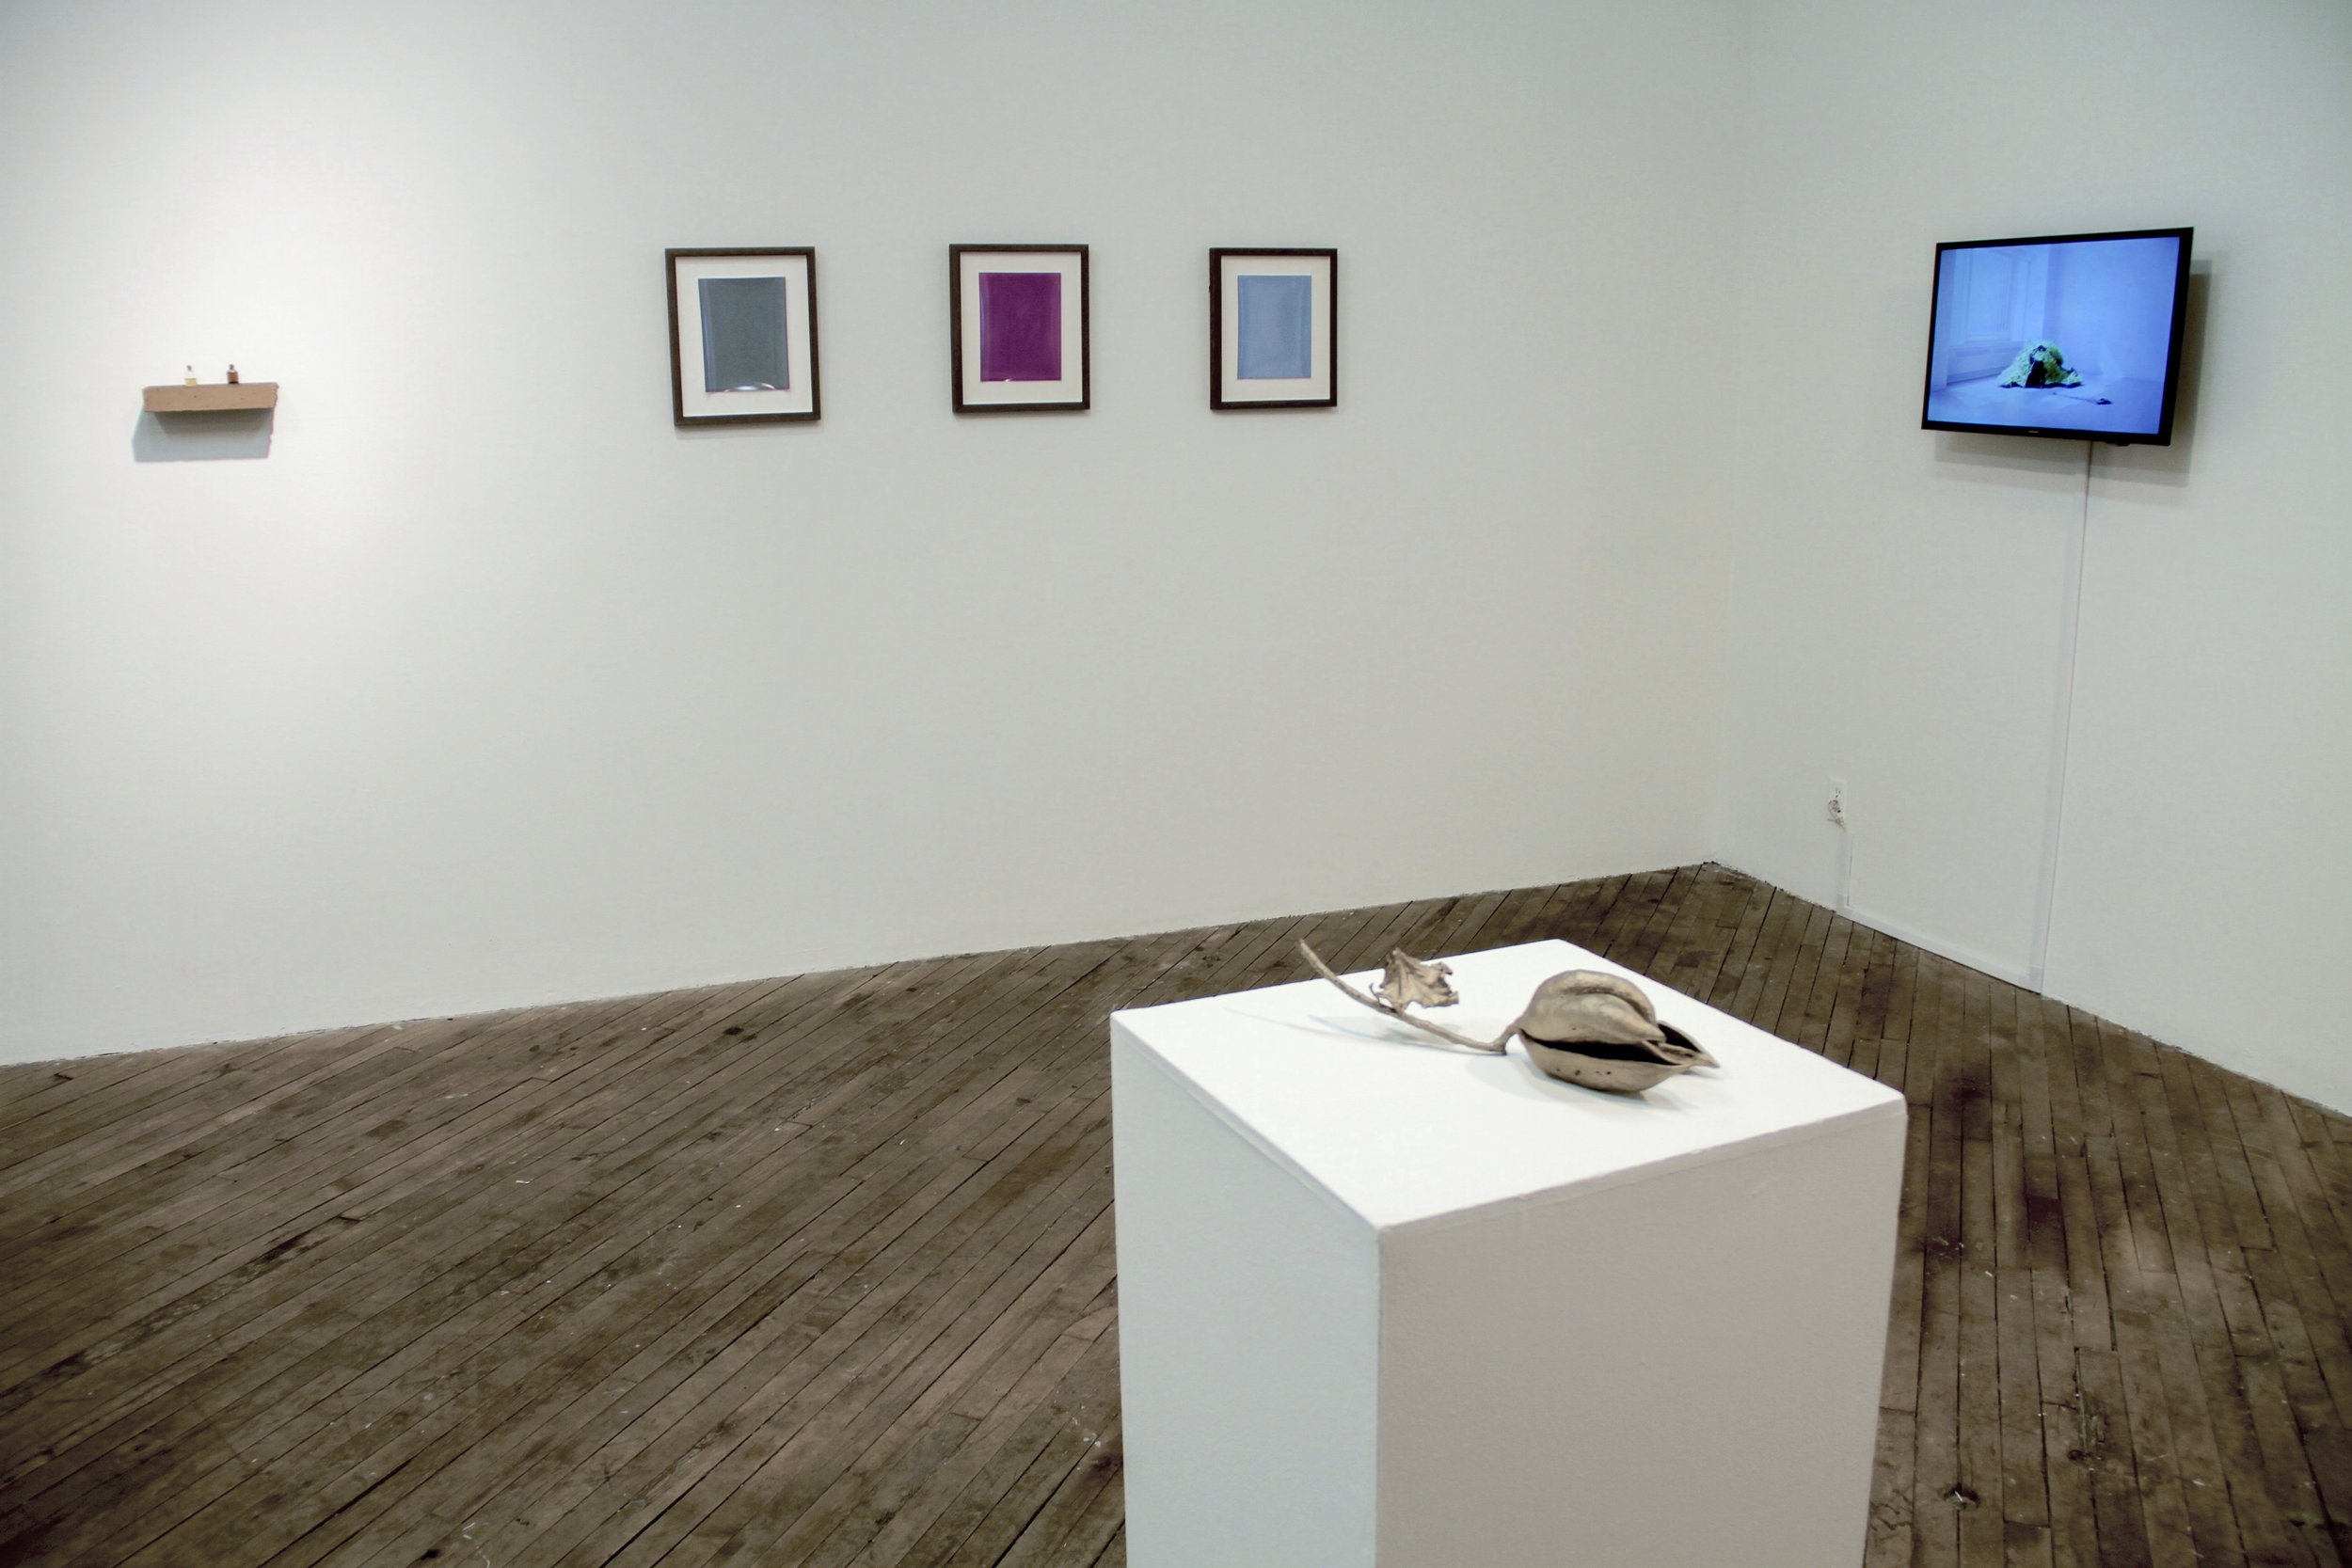    Imperceptibly and Slowly Opening  exhibition at Vox Populi in Philadelphia, 2016.  